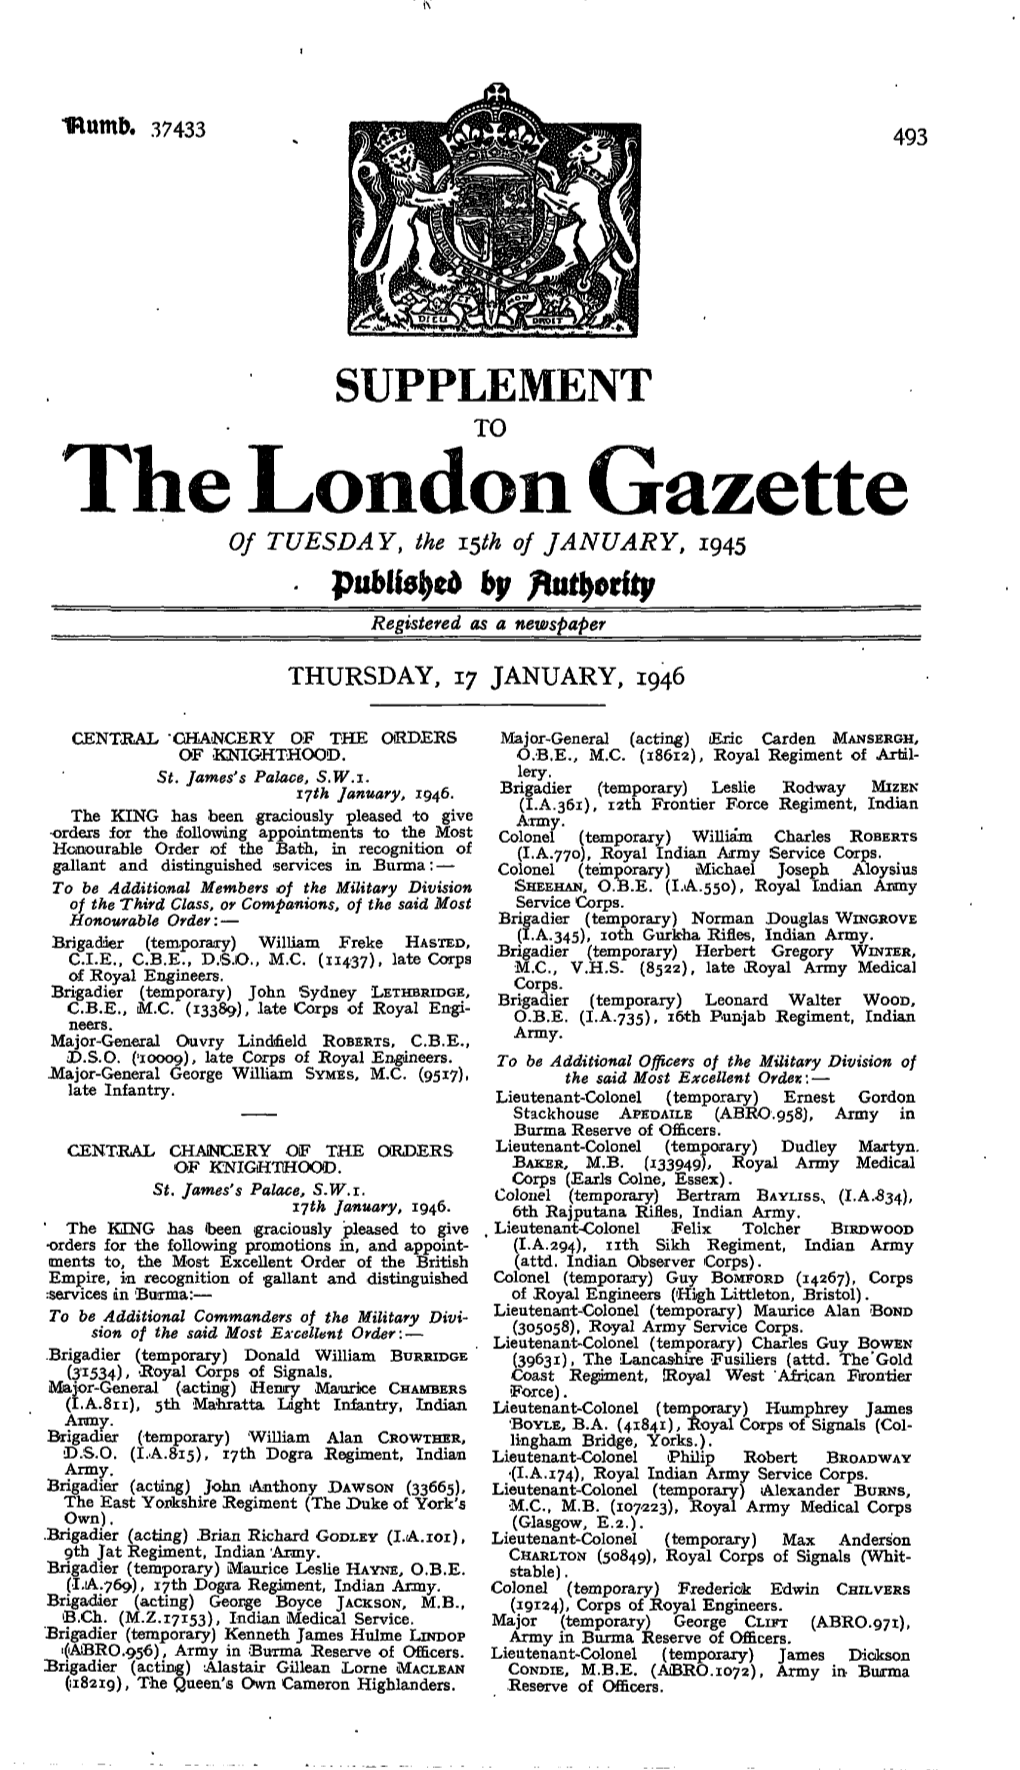 The London Gazette of TUESDAY, the 15^ of JANUARY, 1945 by Registered As a Newspaper